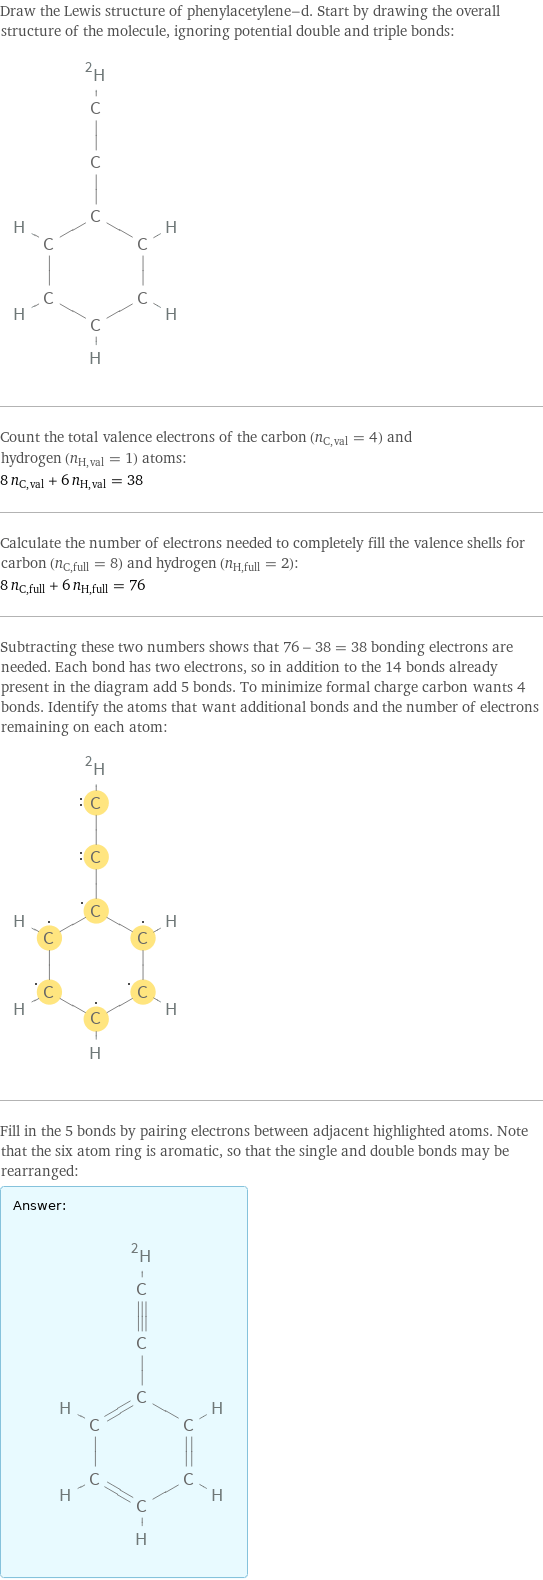 Draw the Lewis structure of phenylacetylene-d. Start by drawing the overall structure of the molecule, ignoring potential double and triple bonds:  Count the total valence electrons of the carbon (n_C, val = 4) and hydrogen (n_H, val = 1) atoms: 8 n_C, val + 6 n_H, val = 38 Calculate the number of electrons needed to completely fill the valence shells for carbon (n_C, full = 8) and hydrogen (n_H, full = 2): 8 n_C, full + 6 n_H, full = 76 Subtracting these two numbers shows that 76 - 38 = 38 bonding electrons are needed. Each bond has two electrons, so in addition to the 14 bonds already present in the diagram add 5 bonds. To minimize formal charge carbon wants 4 bonds. Identify the atoms that want additional bonds and the number of electrons remaining on each atom:  Fill in the 5 bonds by pairing electrons between adjacent highlighted atoms. Note that the six atom ring is aromatic, so that the single and double bonds may be rearranged: Answer: |   | 